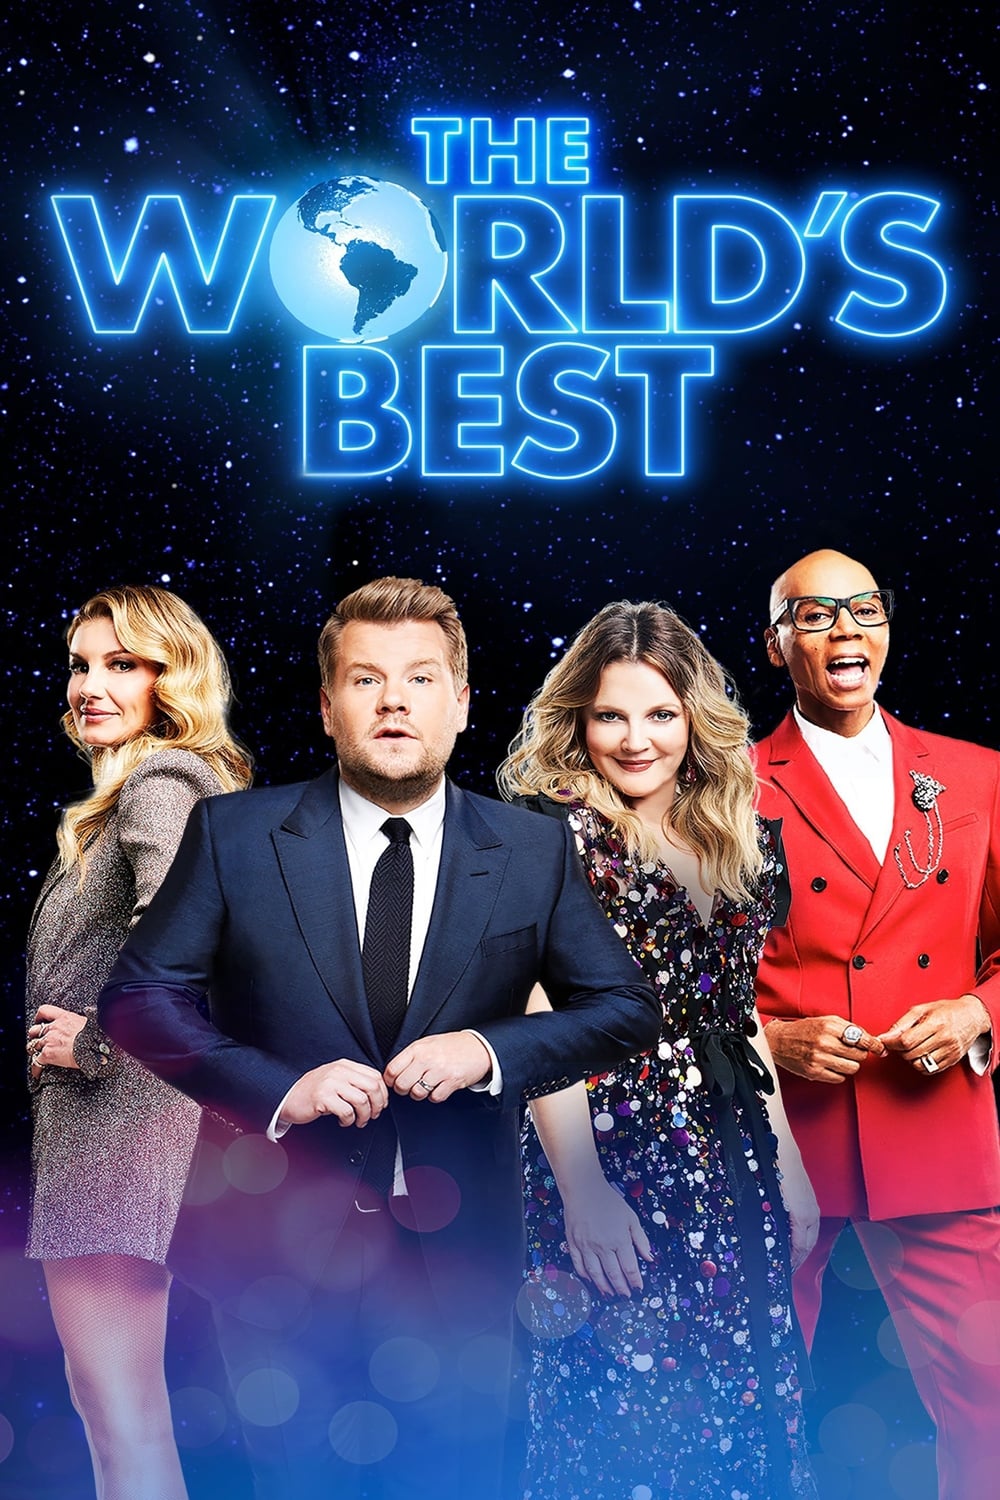 The World's Best (2019)